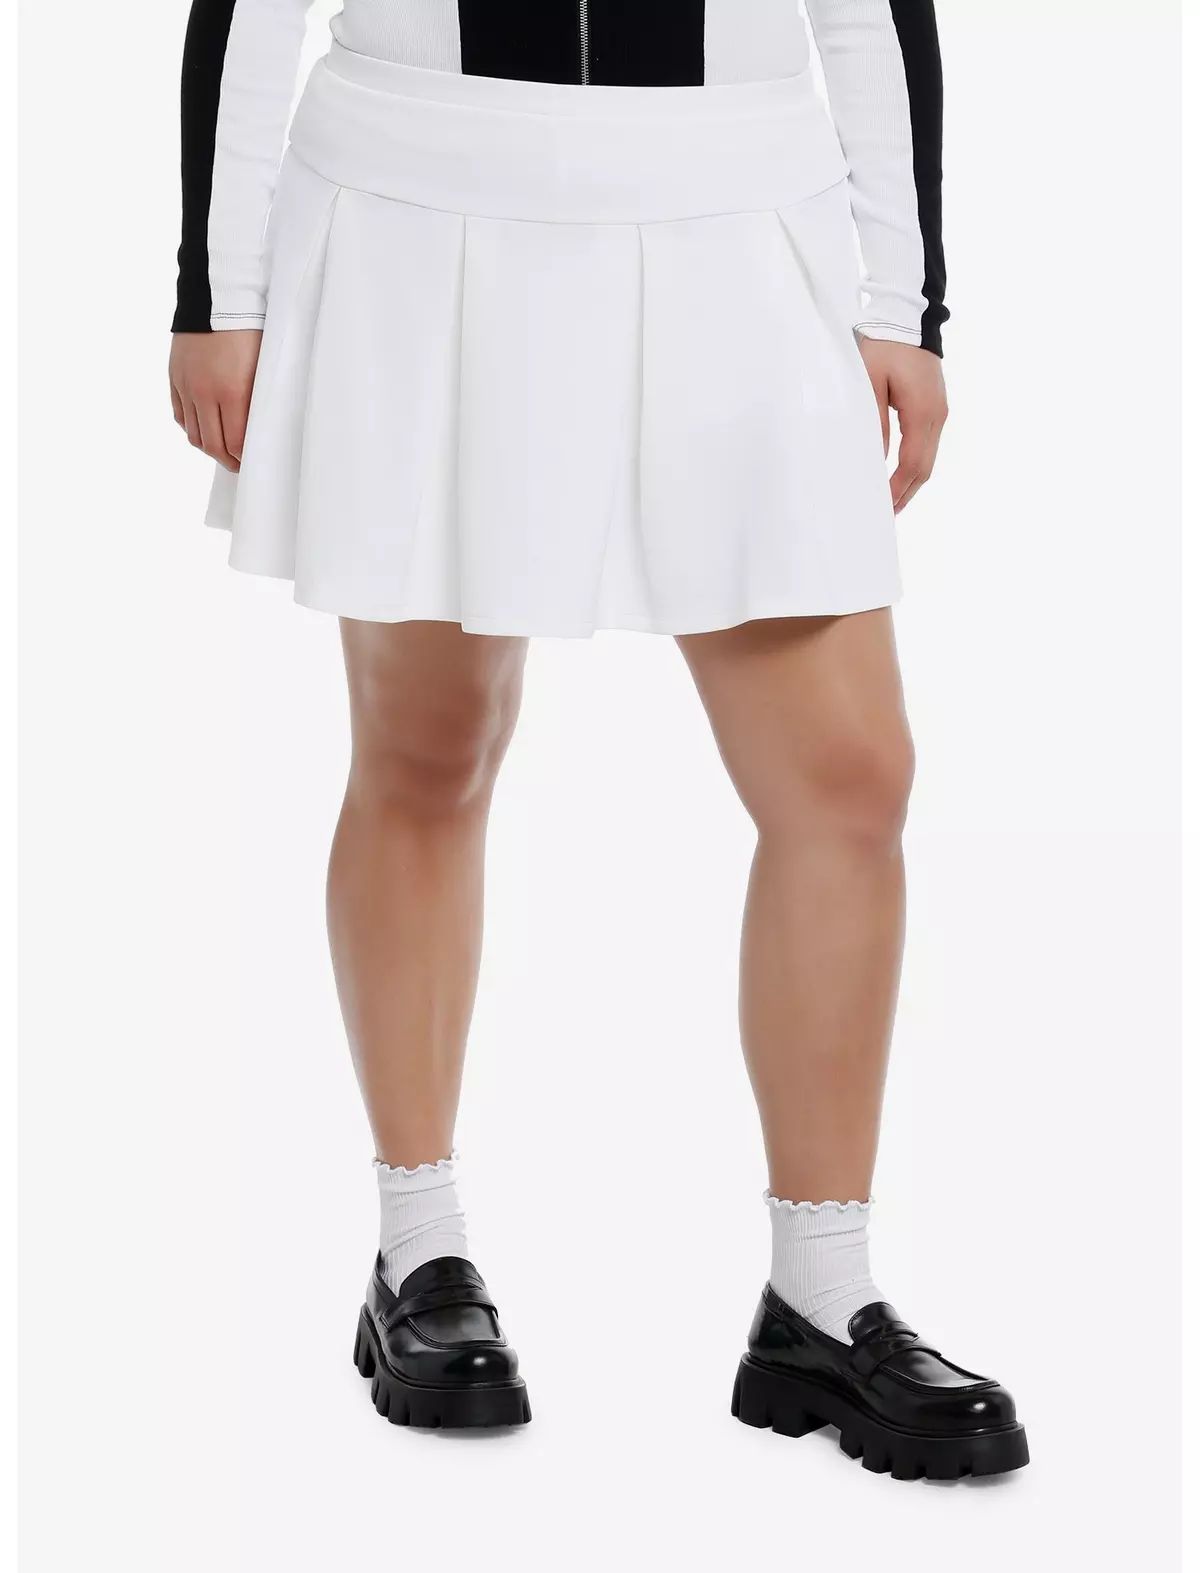 Sweet Society® White Pleated Skort Plus Size | Hot Topic